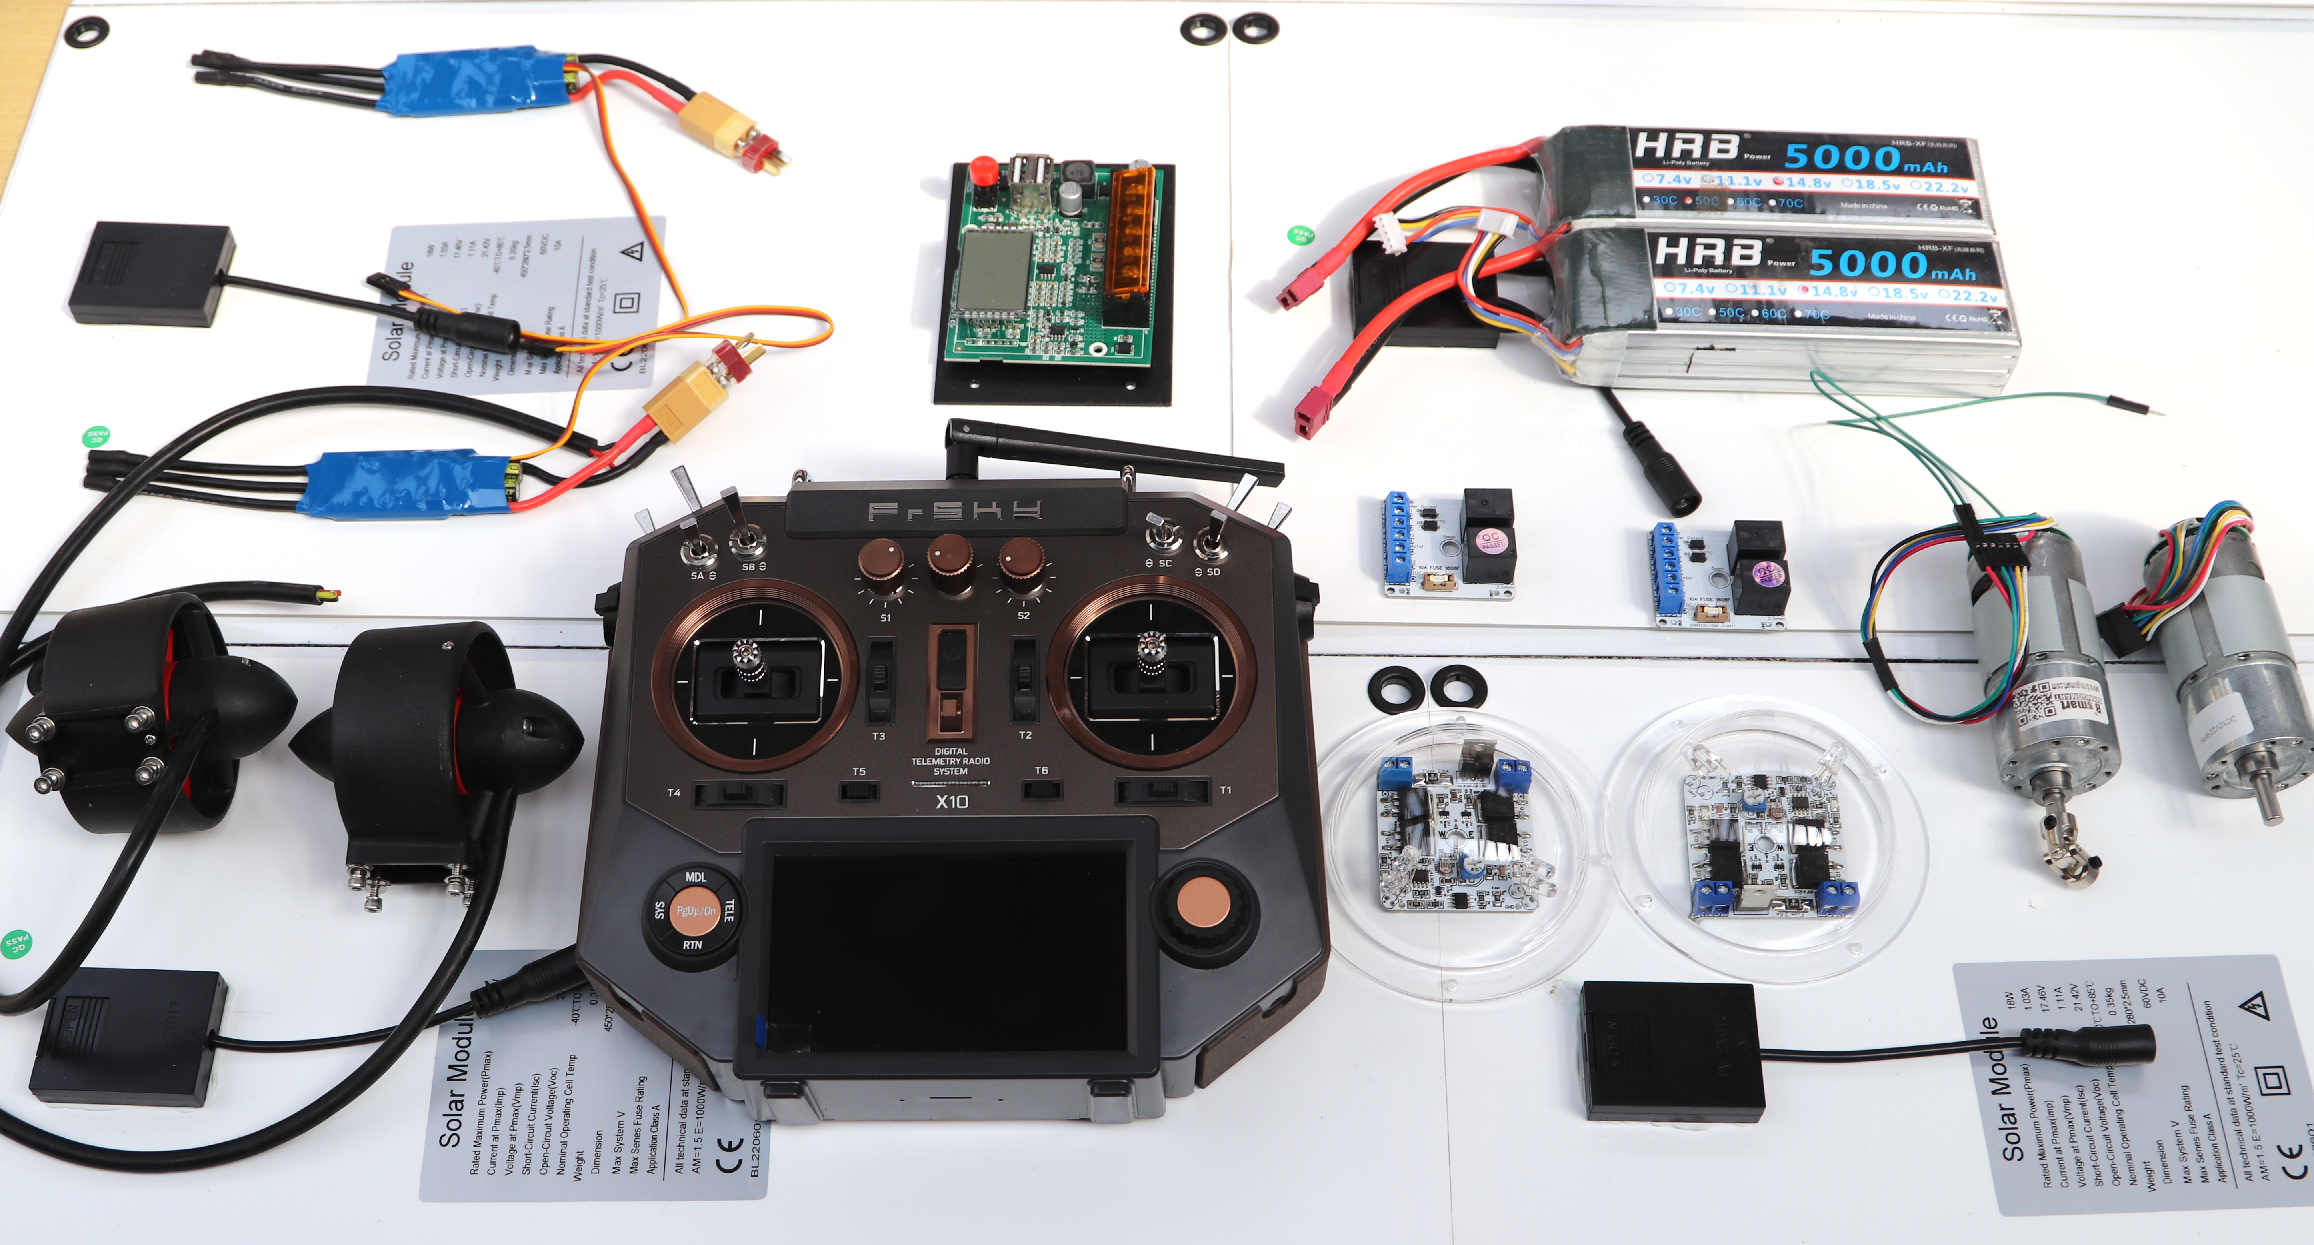 The radio control rx and tx, jet drives and solar panel charge and sun tracking equipment